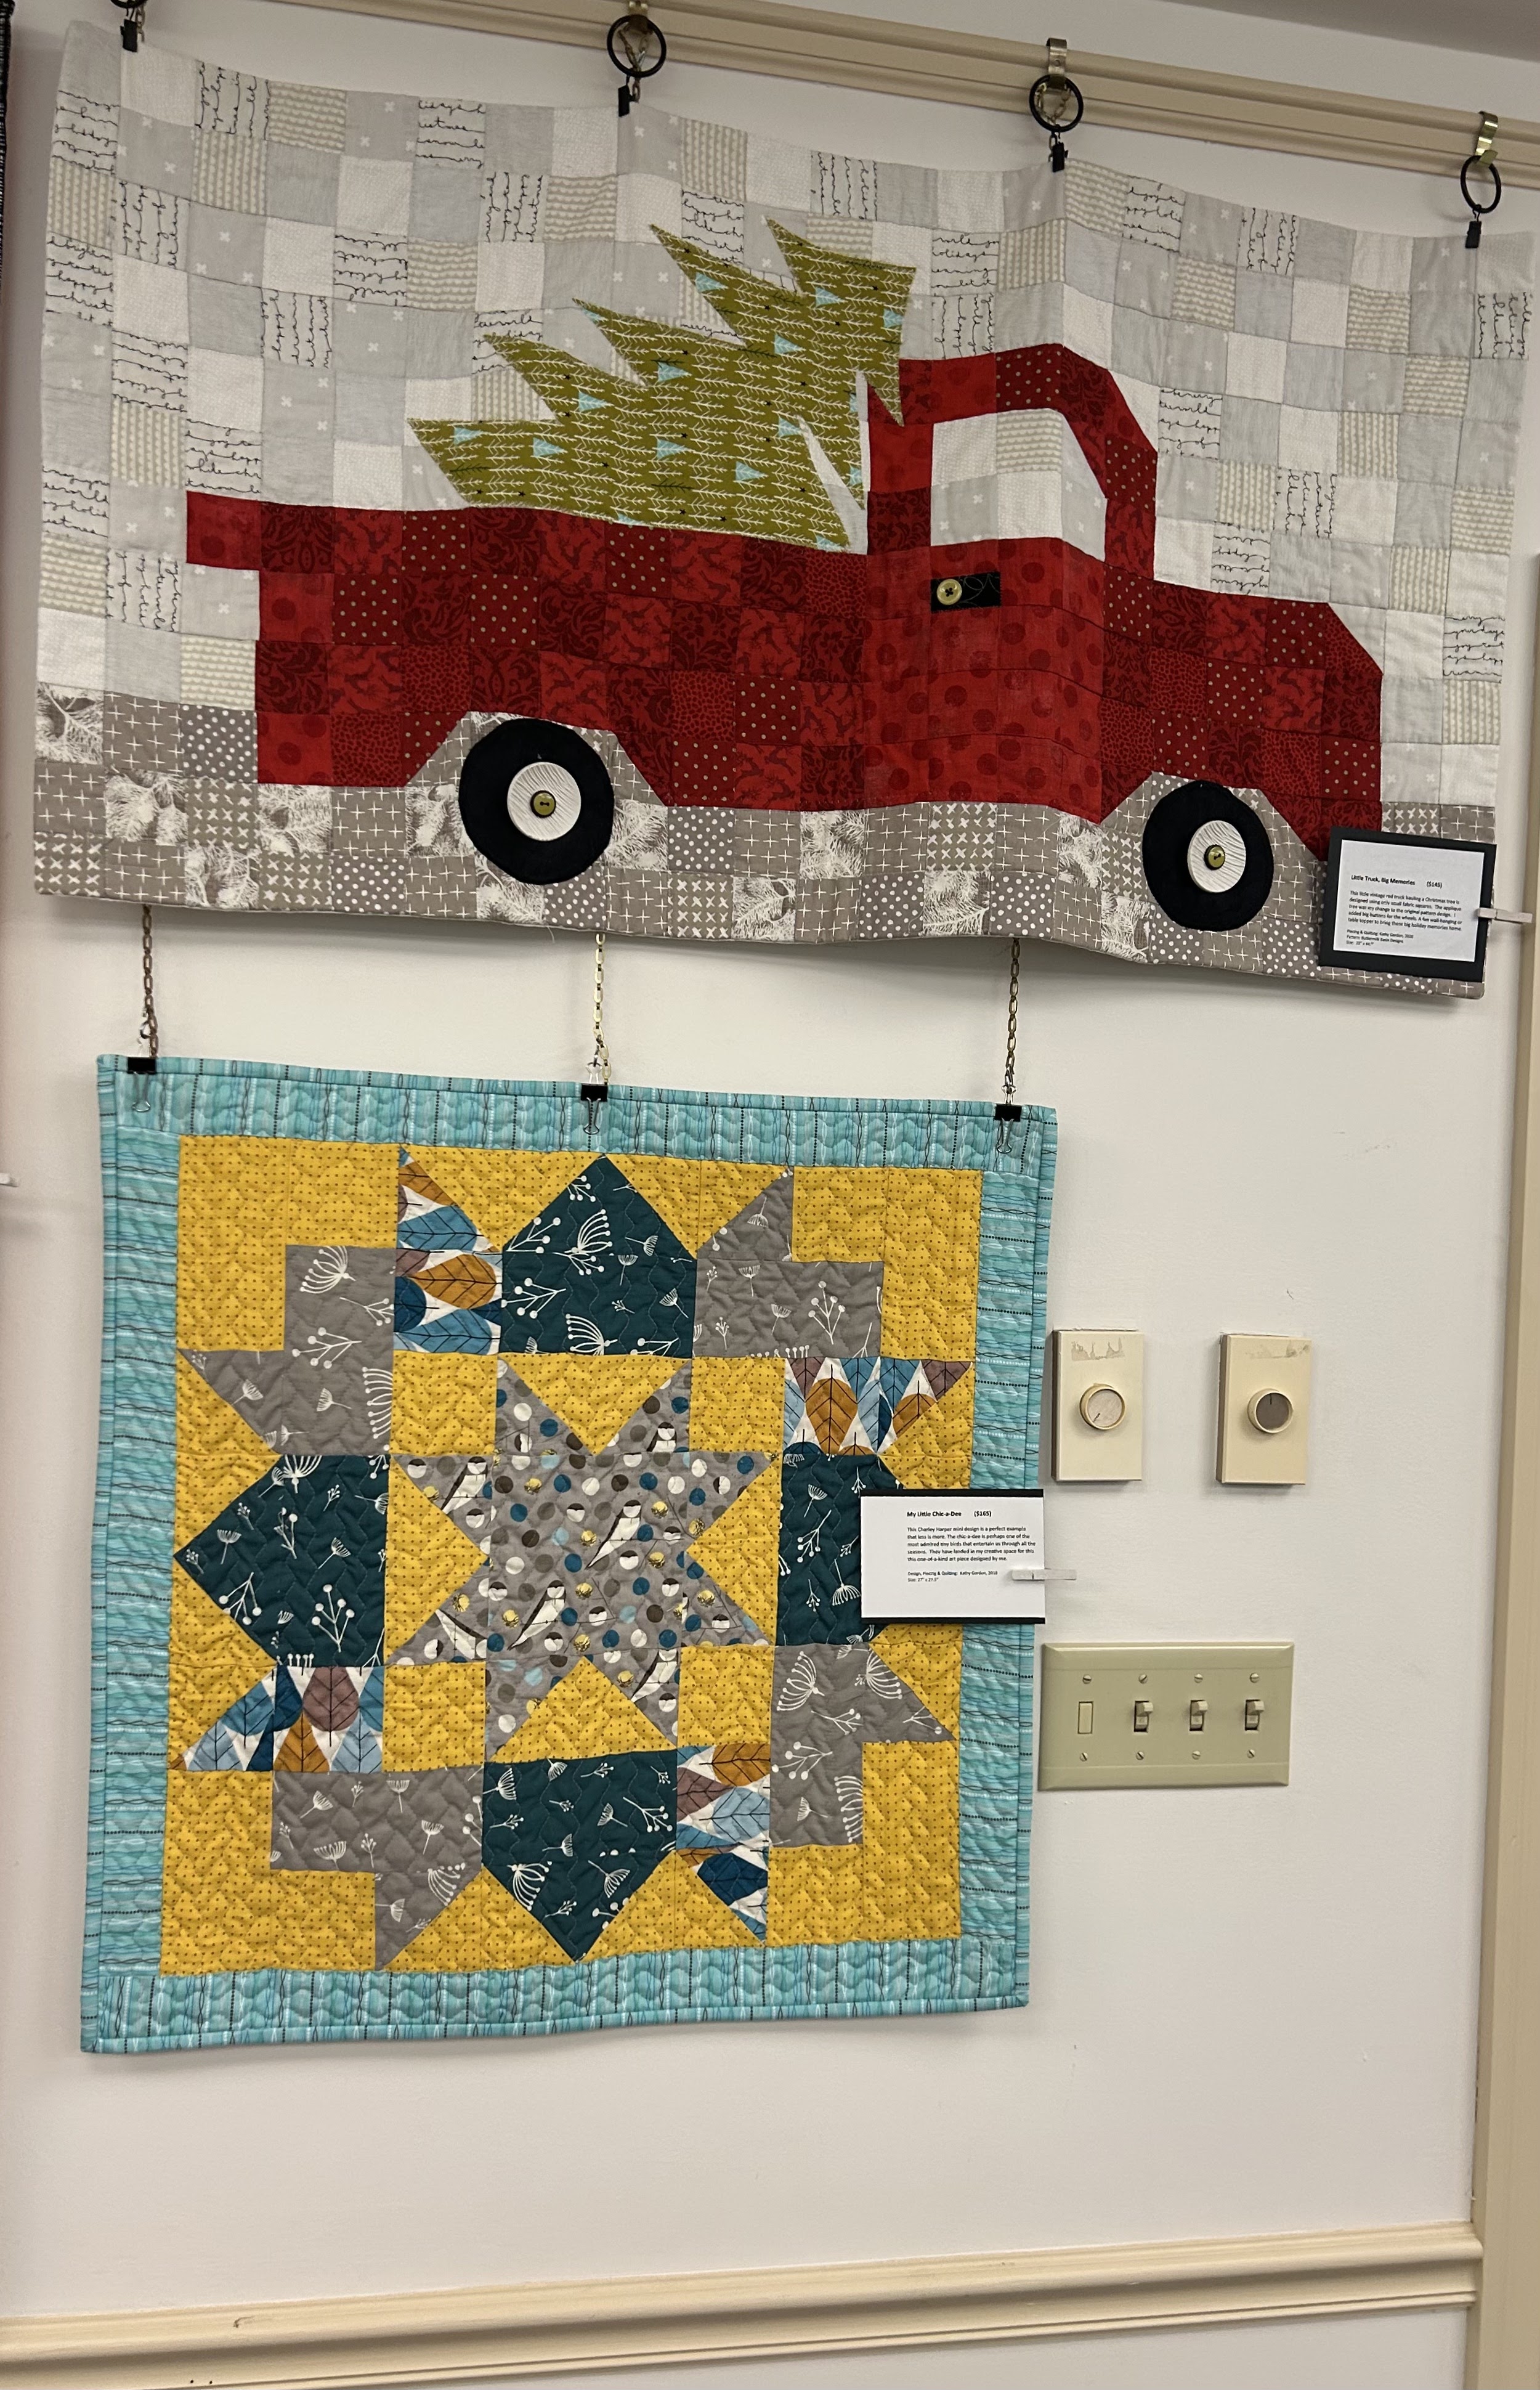 Kathy Quilts! > The Perfect Christmas Gift - Quilting - Kathy's Quilts